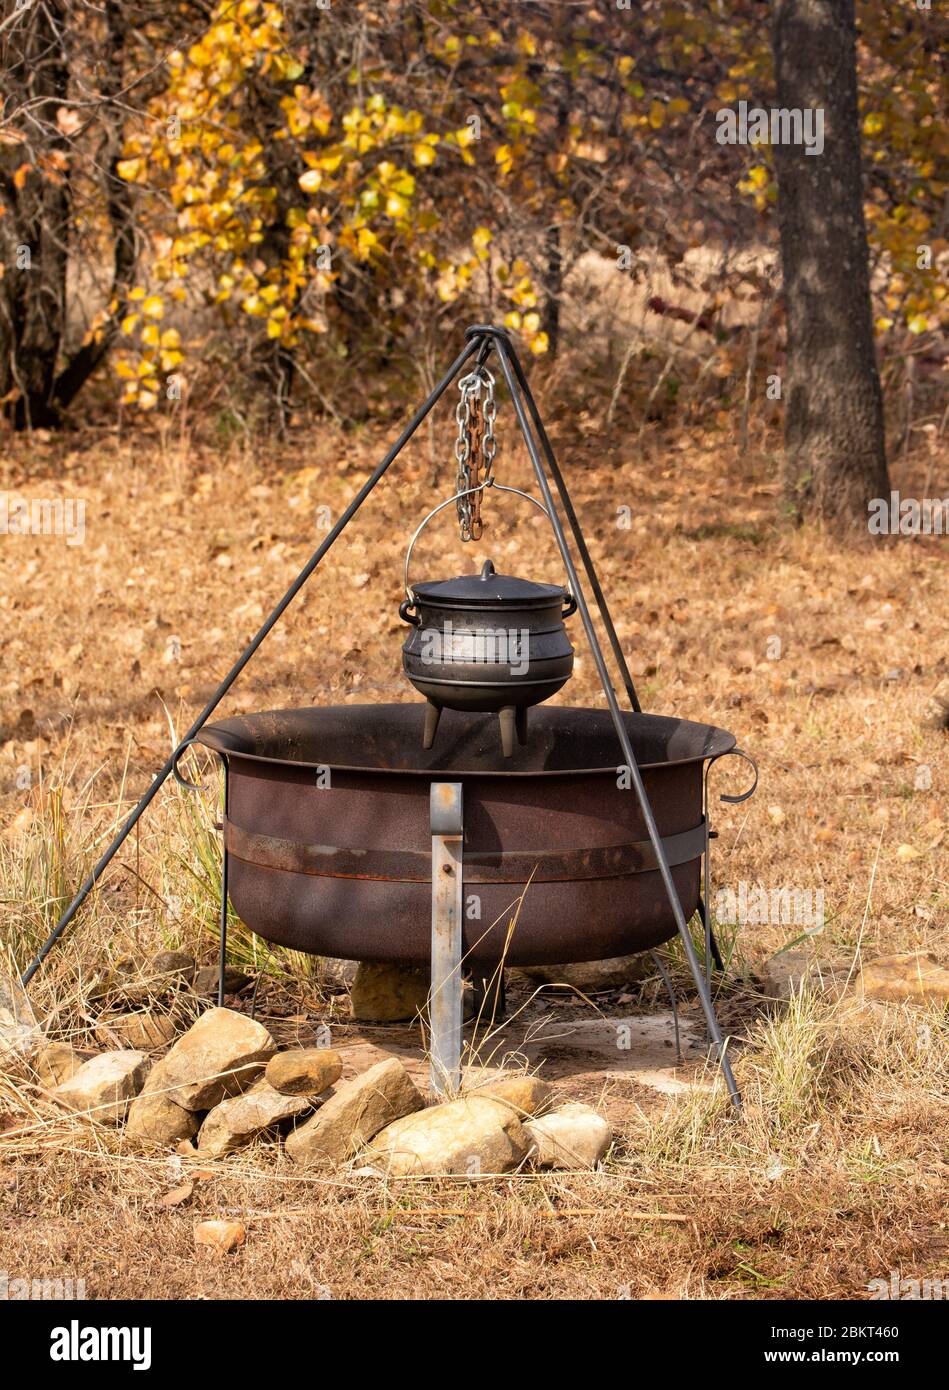 Stew cooking in a cast iron potjie suspended over open fire in a fire pit outdoors; with fall color background Stock Photo